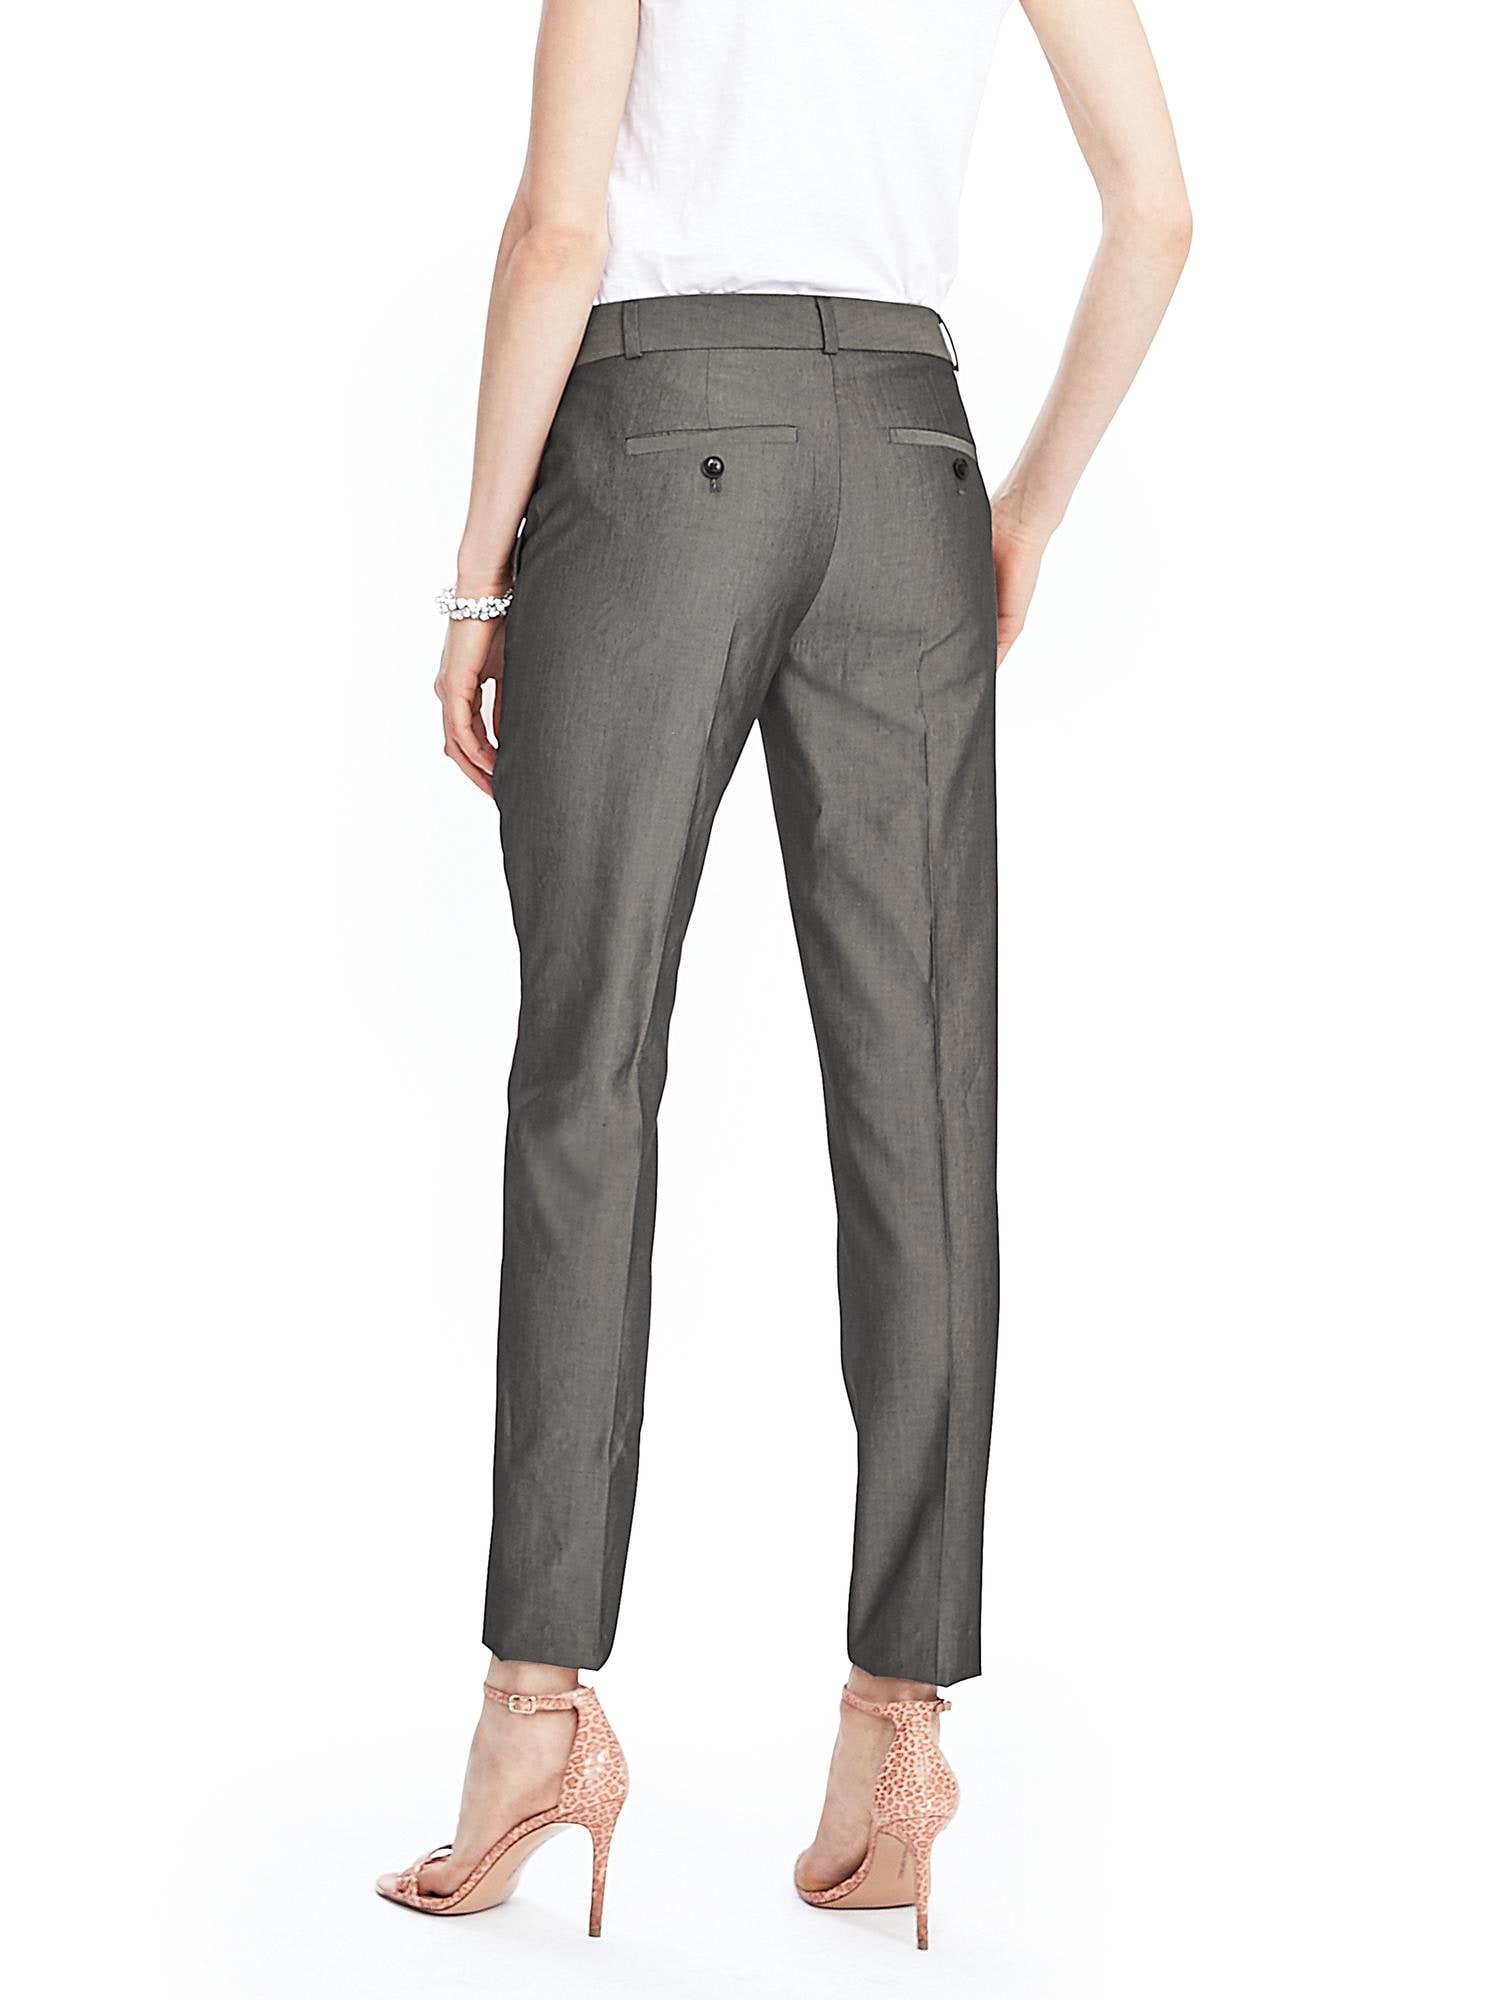 Avery-Fit Silk Blend Pant